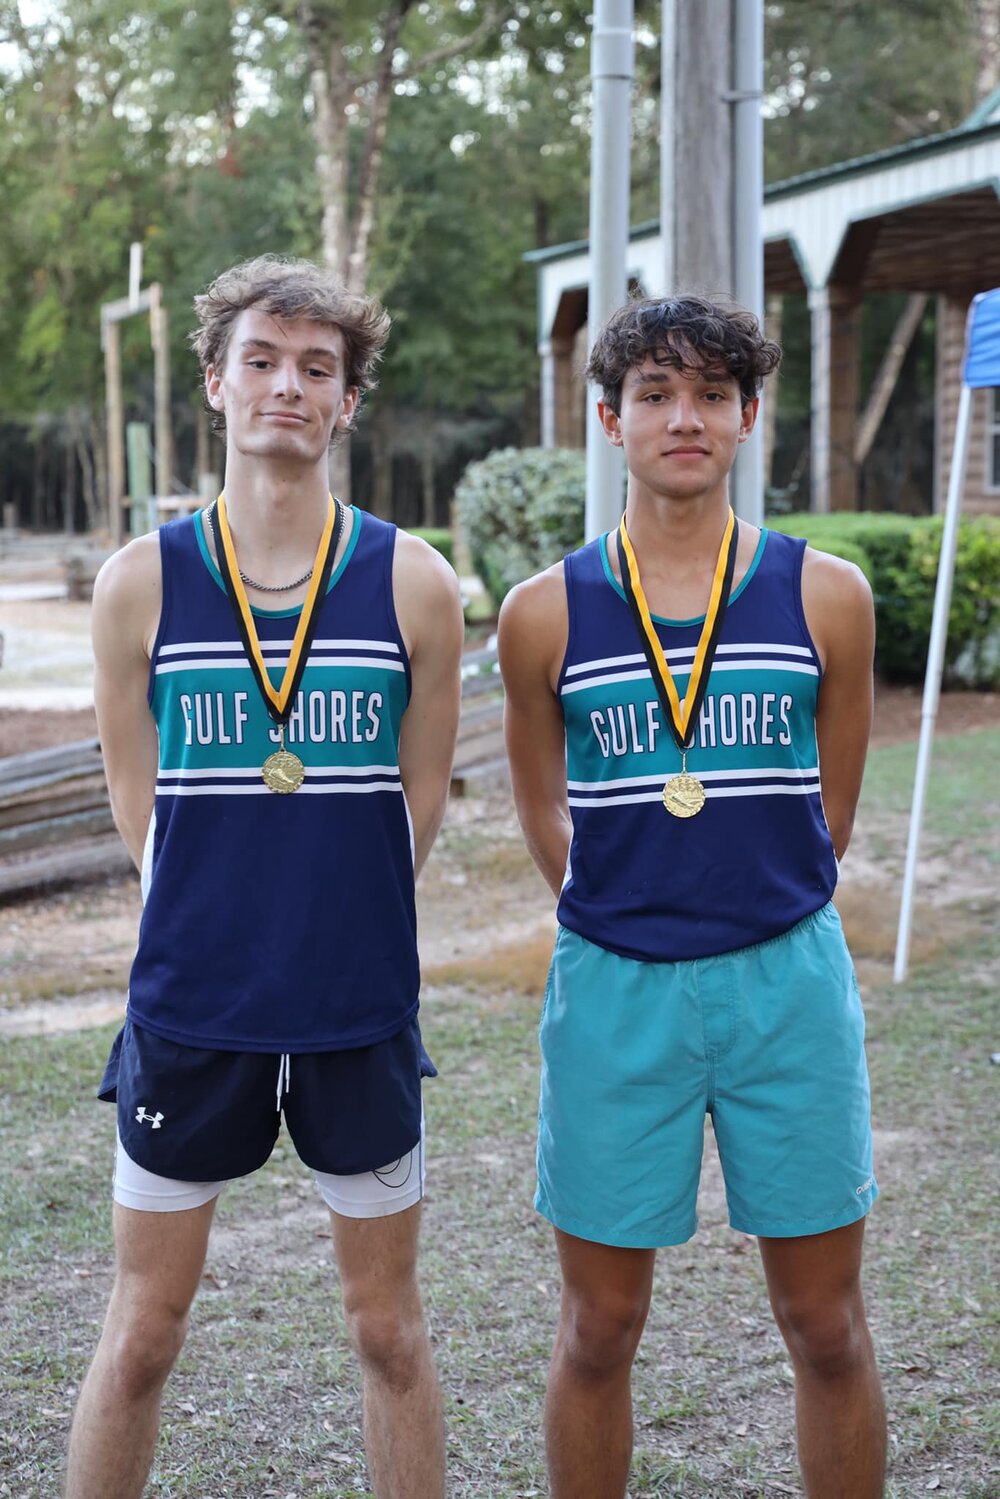 Gulf Shores senior Ethan Sharkey and junior Beck Montiel represented the Dolphins as All-County honorees from Thursday’s Baldwin County cross country championship meet in Bay Minette. The pair helped Gulf Shores finish fourth in the team standings with the Class 5A Section 1 Championship scheduled for the same course on Nov. 2.